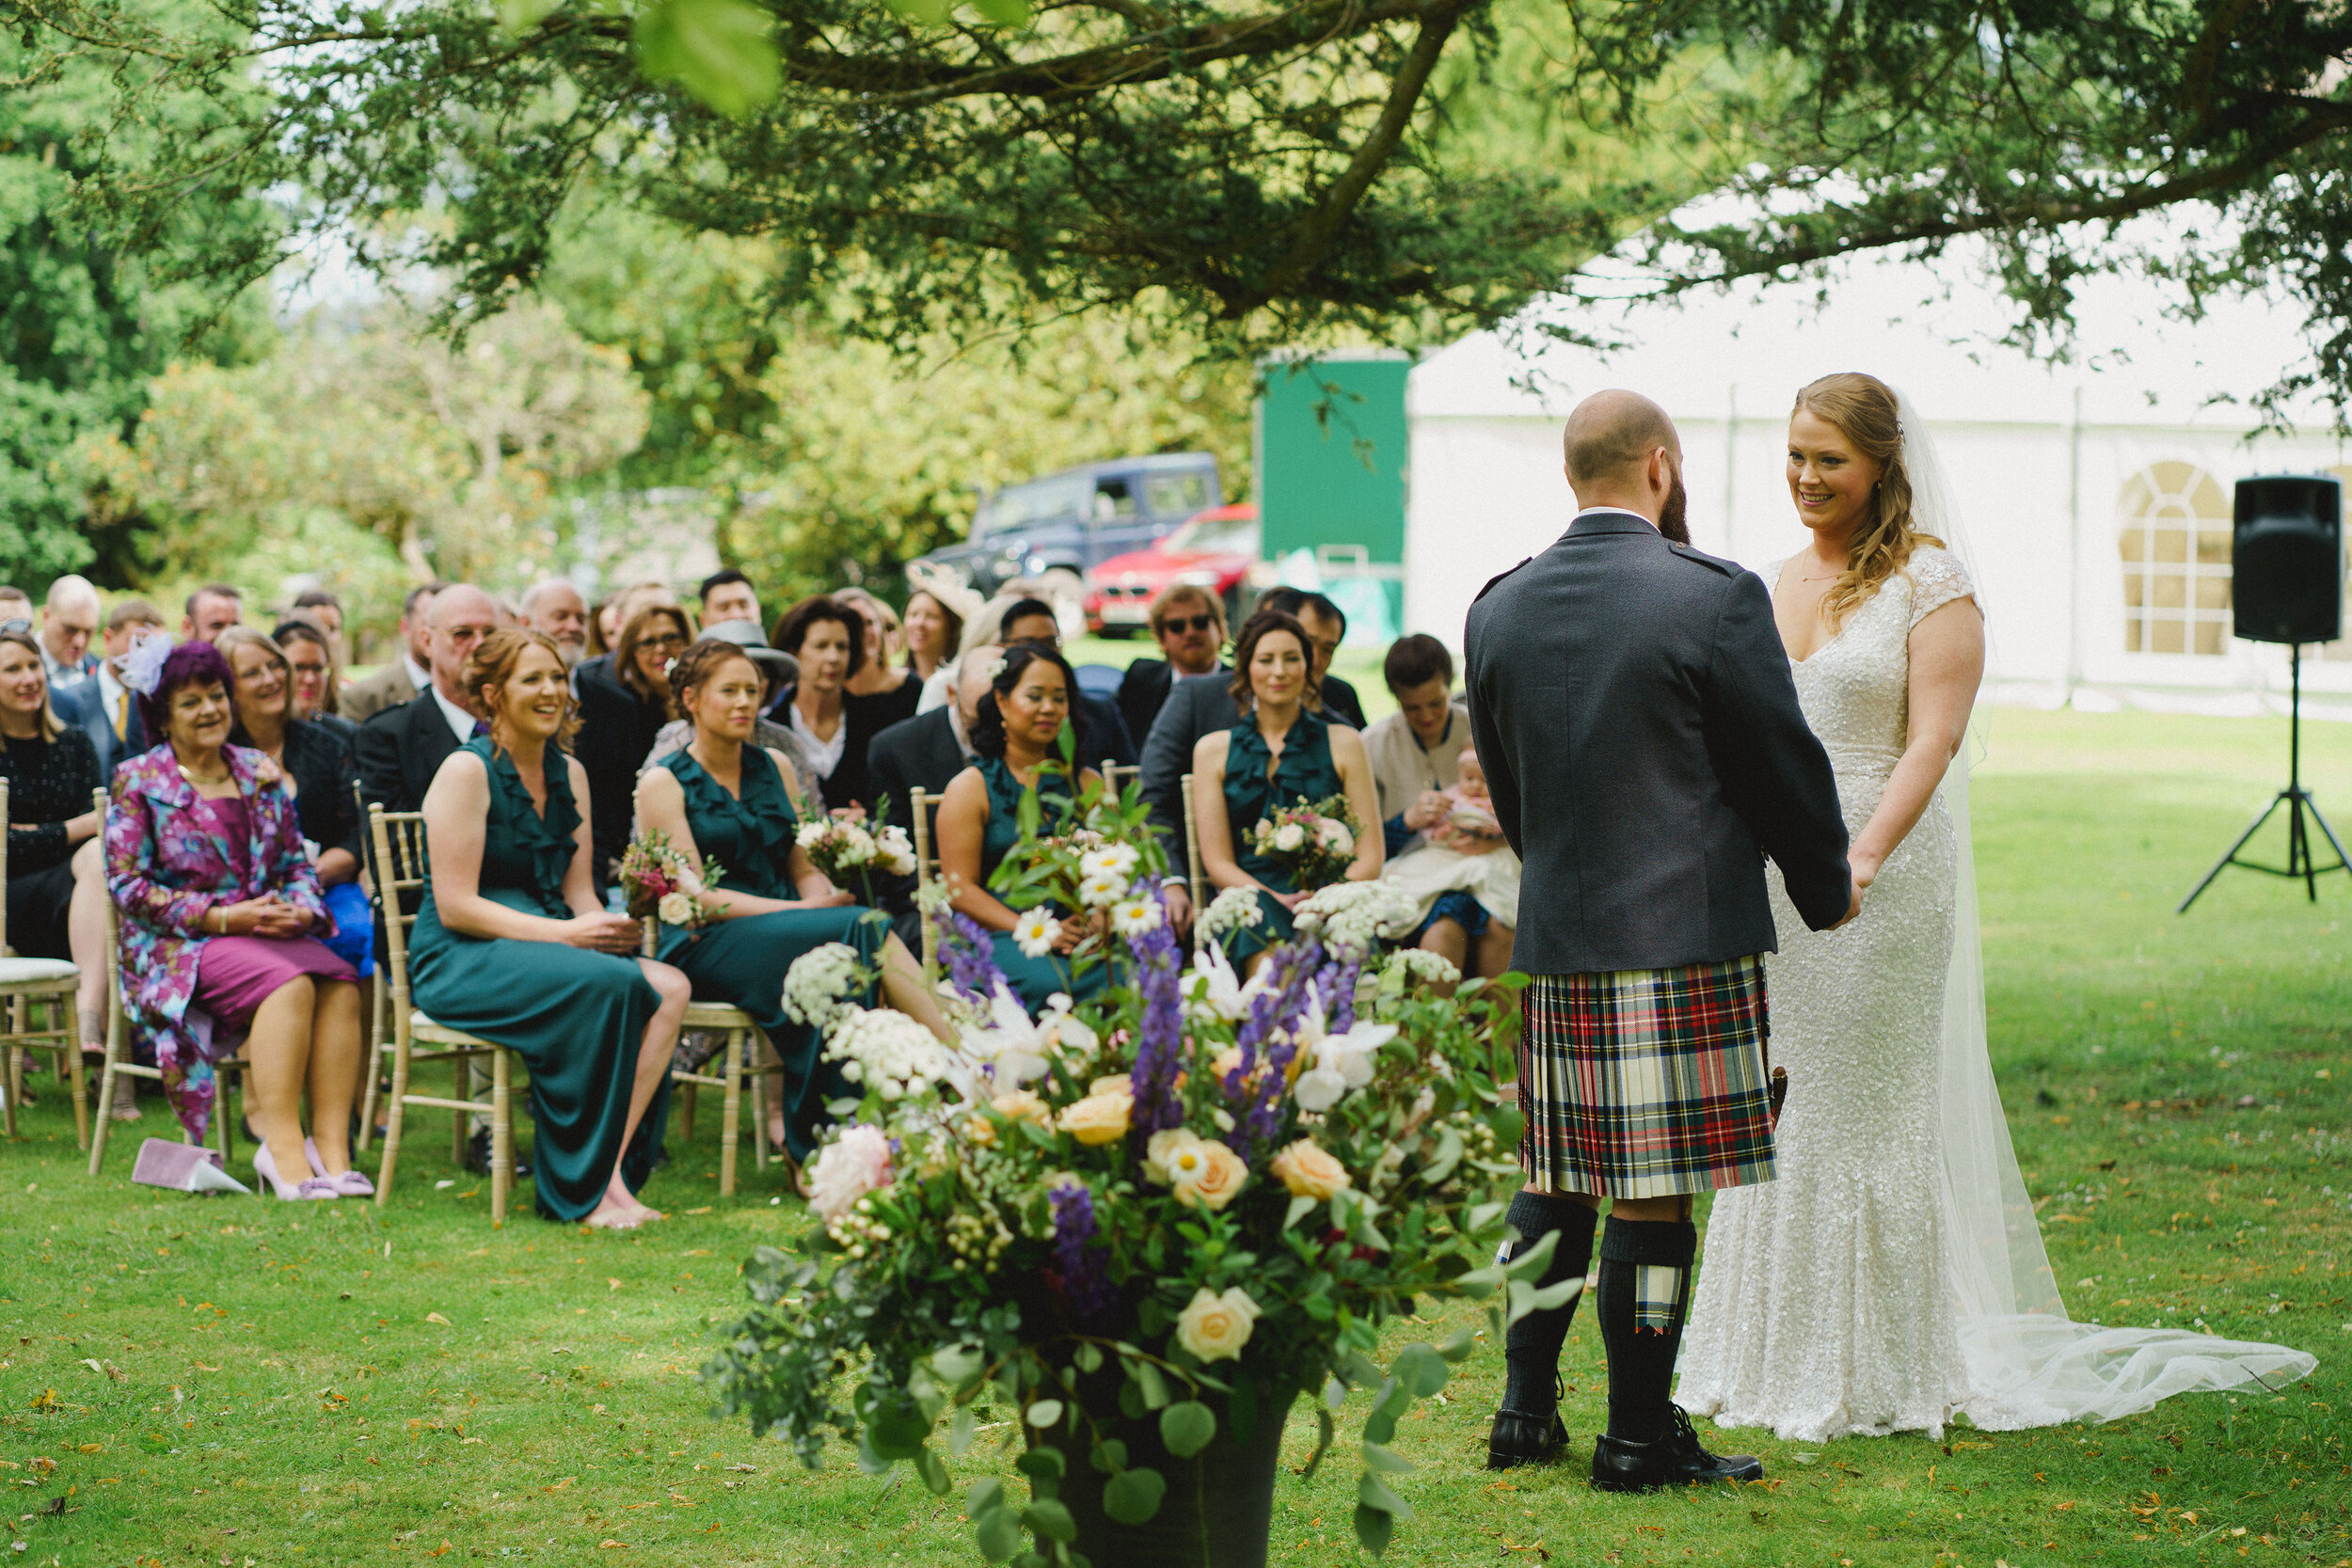 Bride and Groom getting married outside at Strathallan Castle, surrounded by guests and beautiful wedding flowers. 